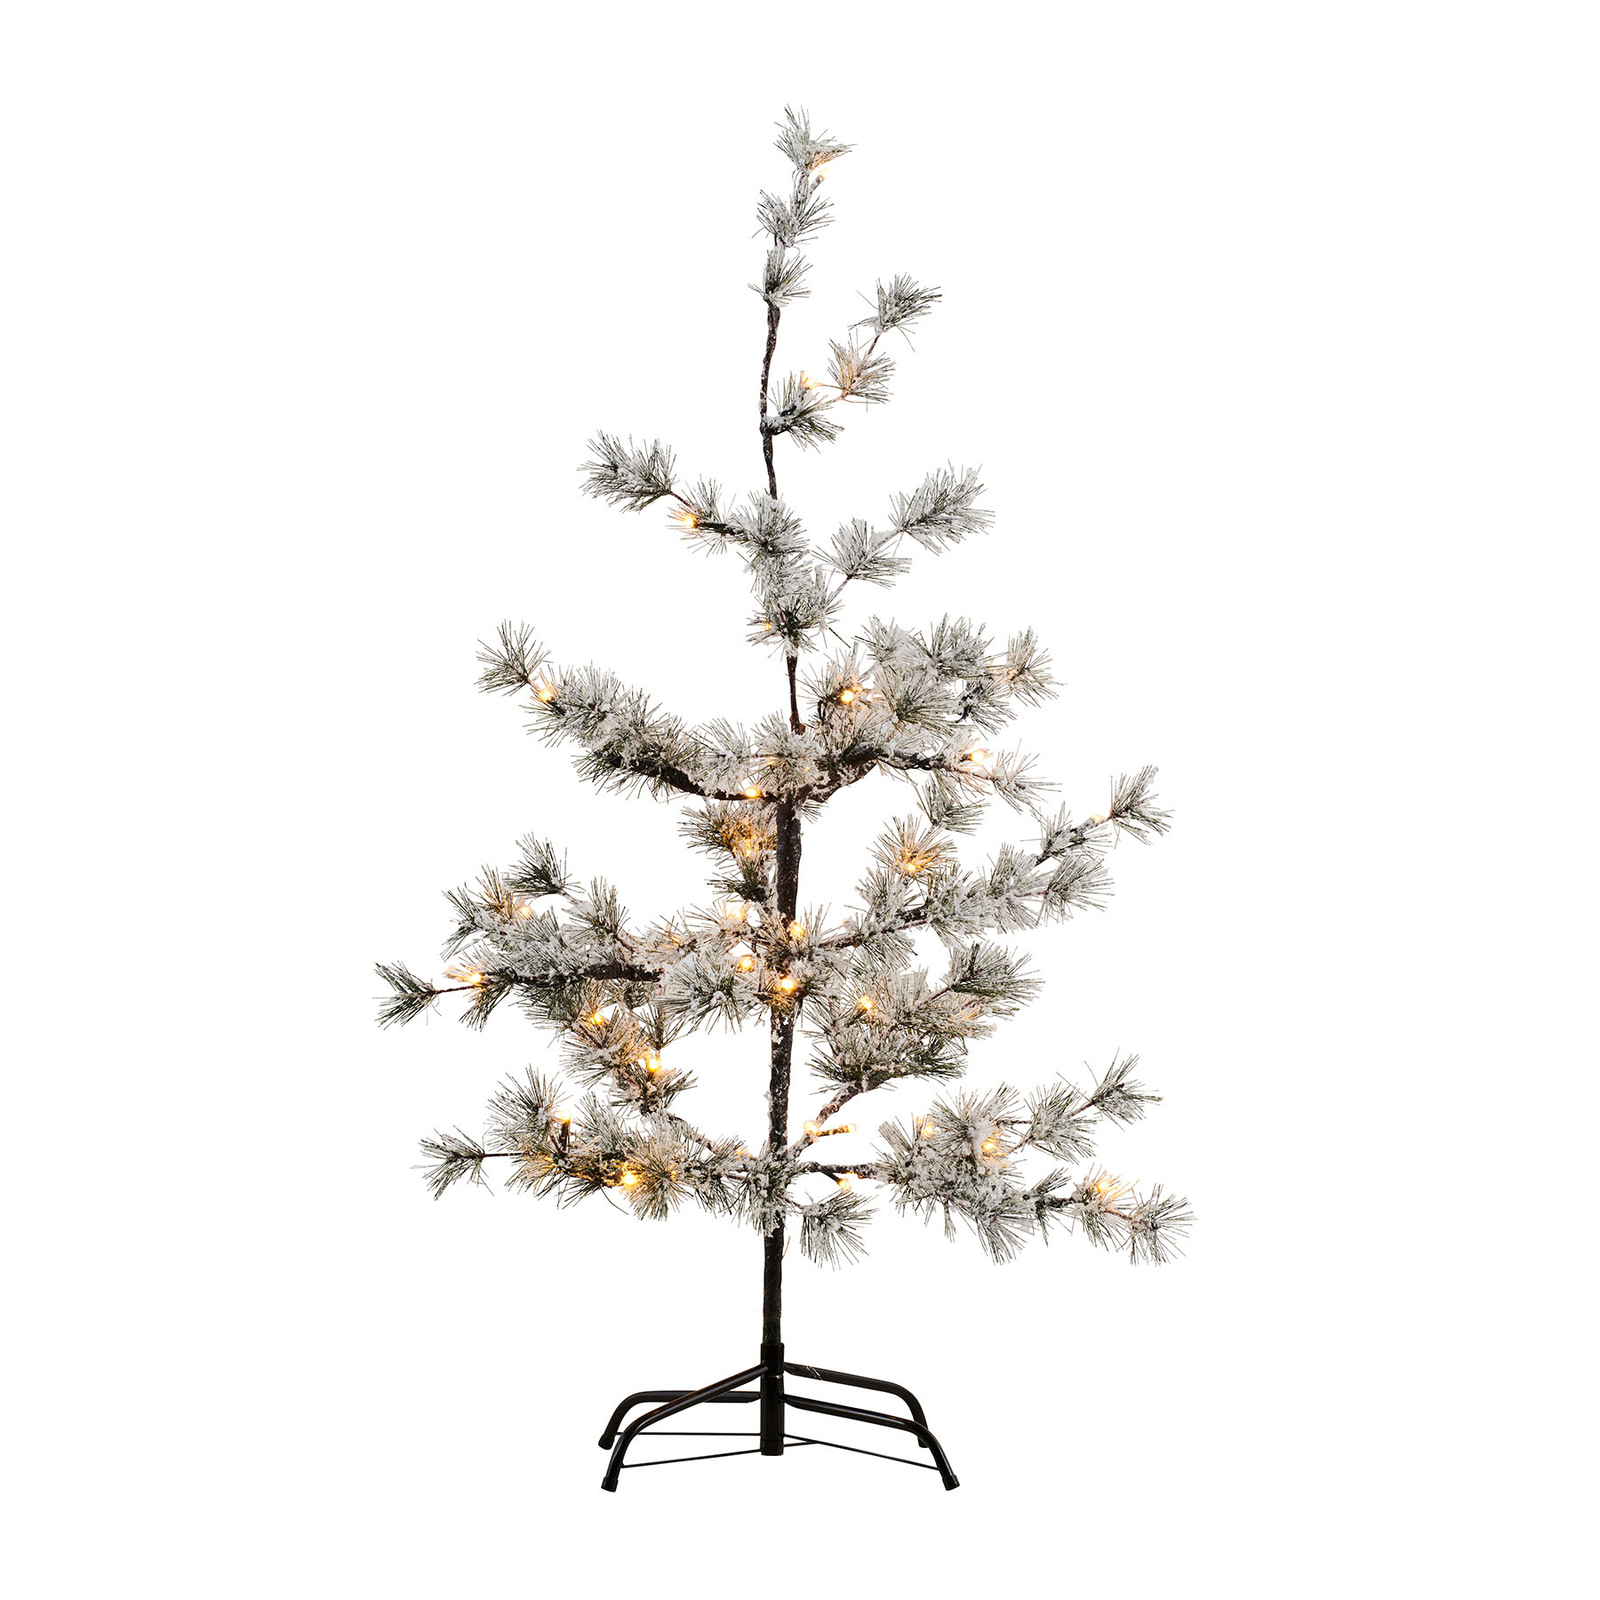 LED tree Alfi, height 90 cm, battery-operated